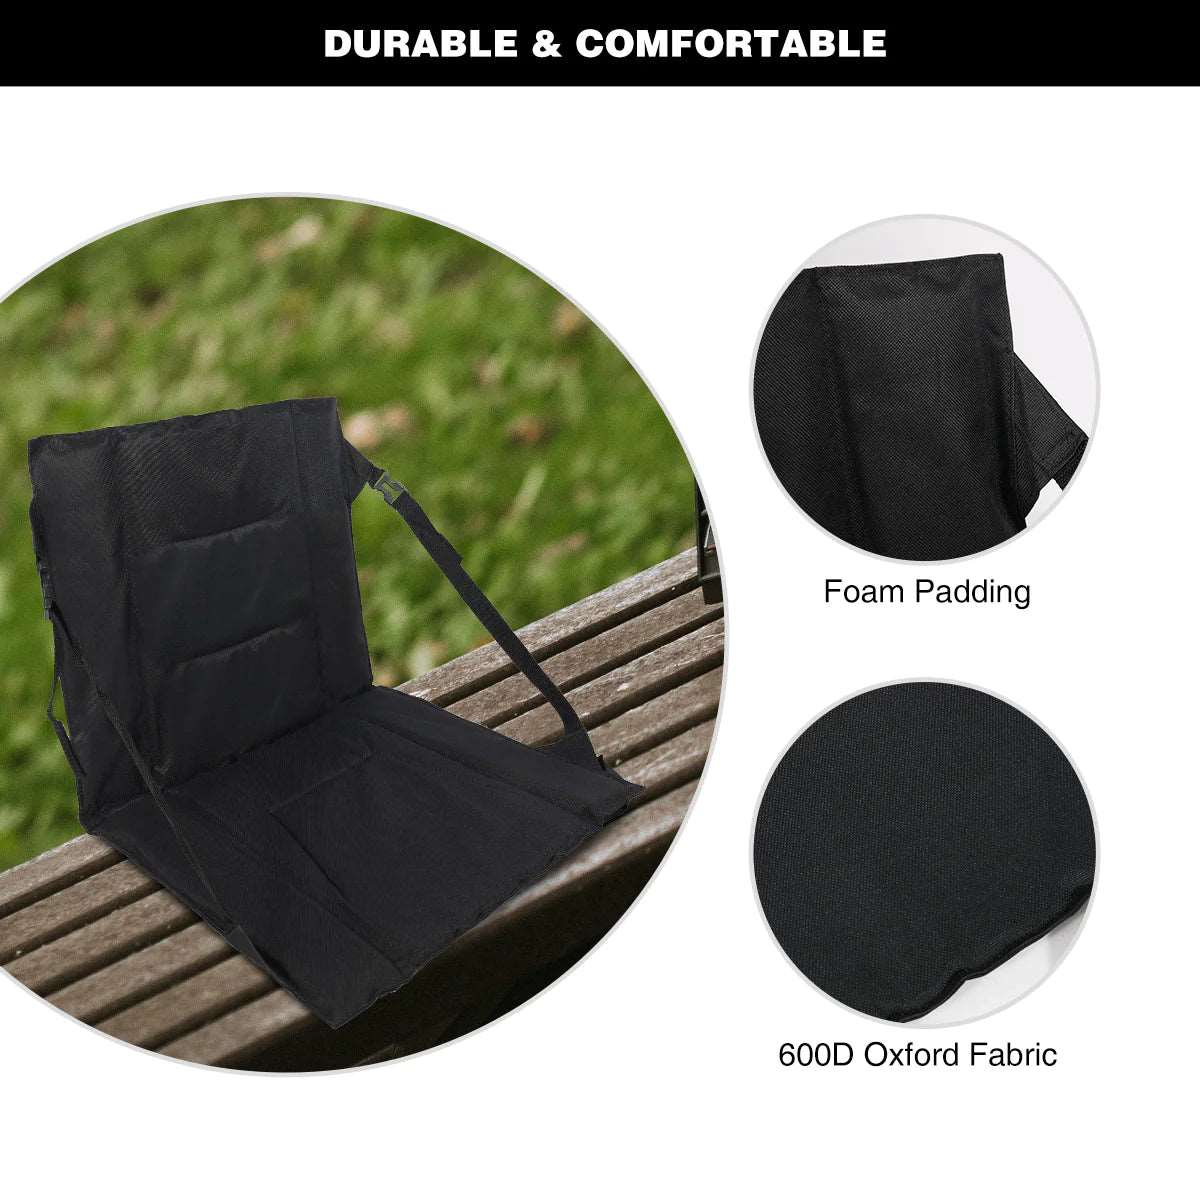 Folding Stadium Seat Cushion for Bleachers, Oxford Cloth Portable Bleacher Seat for Outdoor Sports, Size: 43, Gray